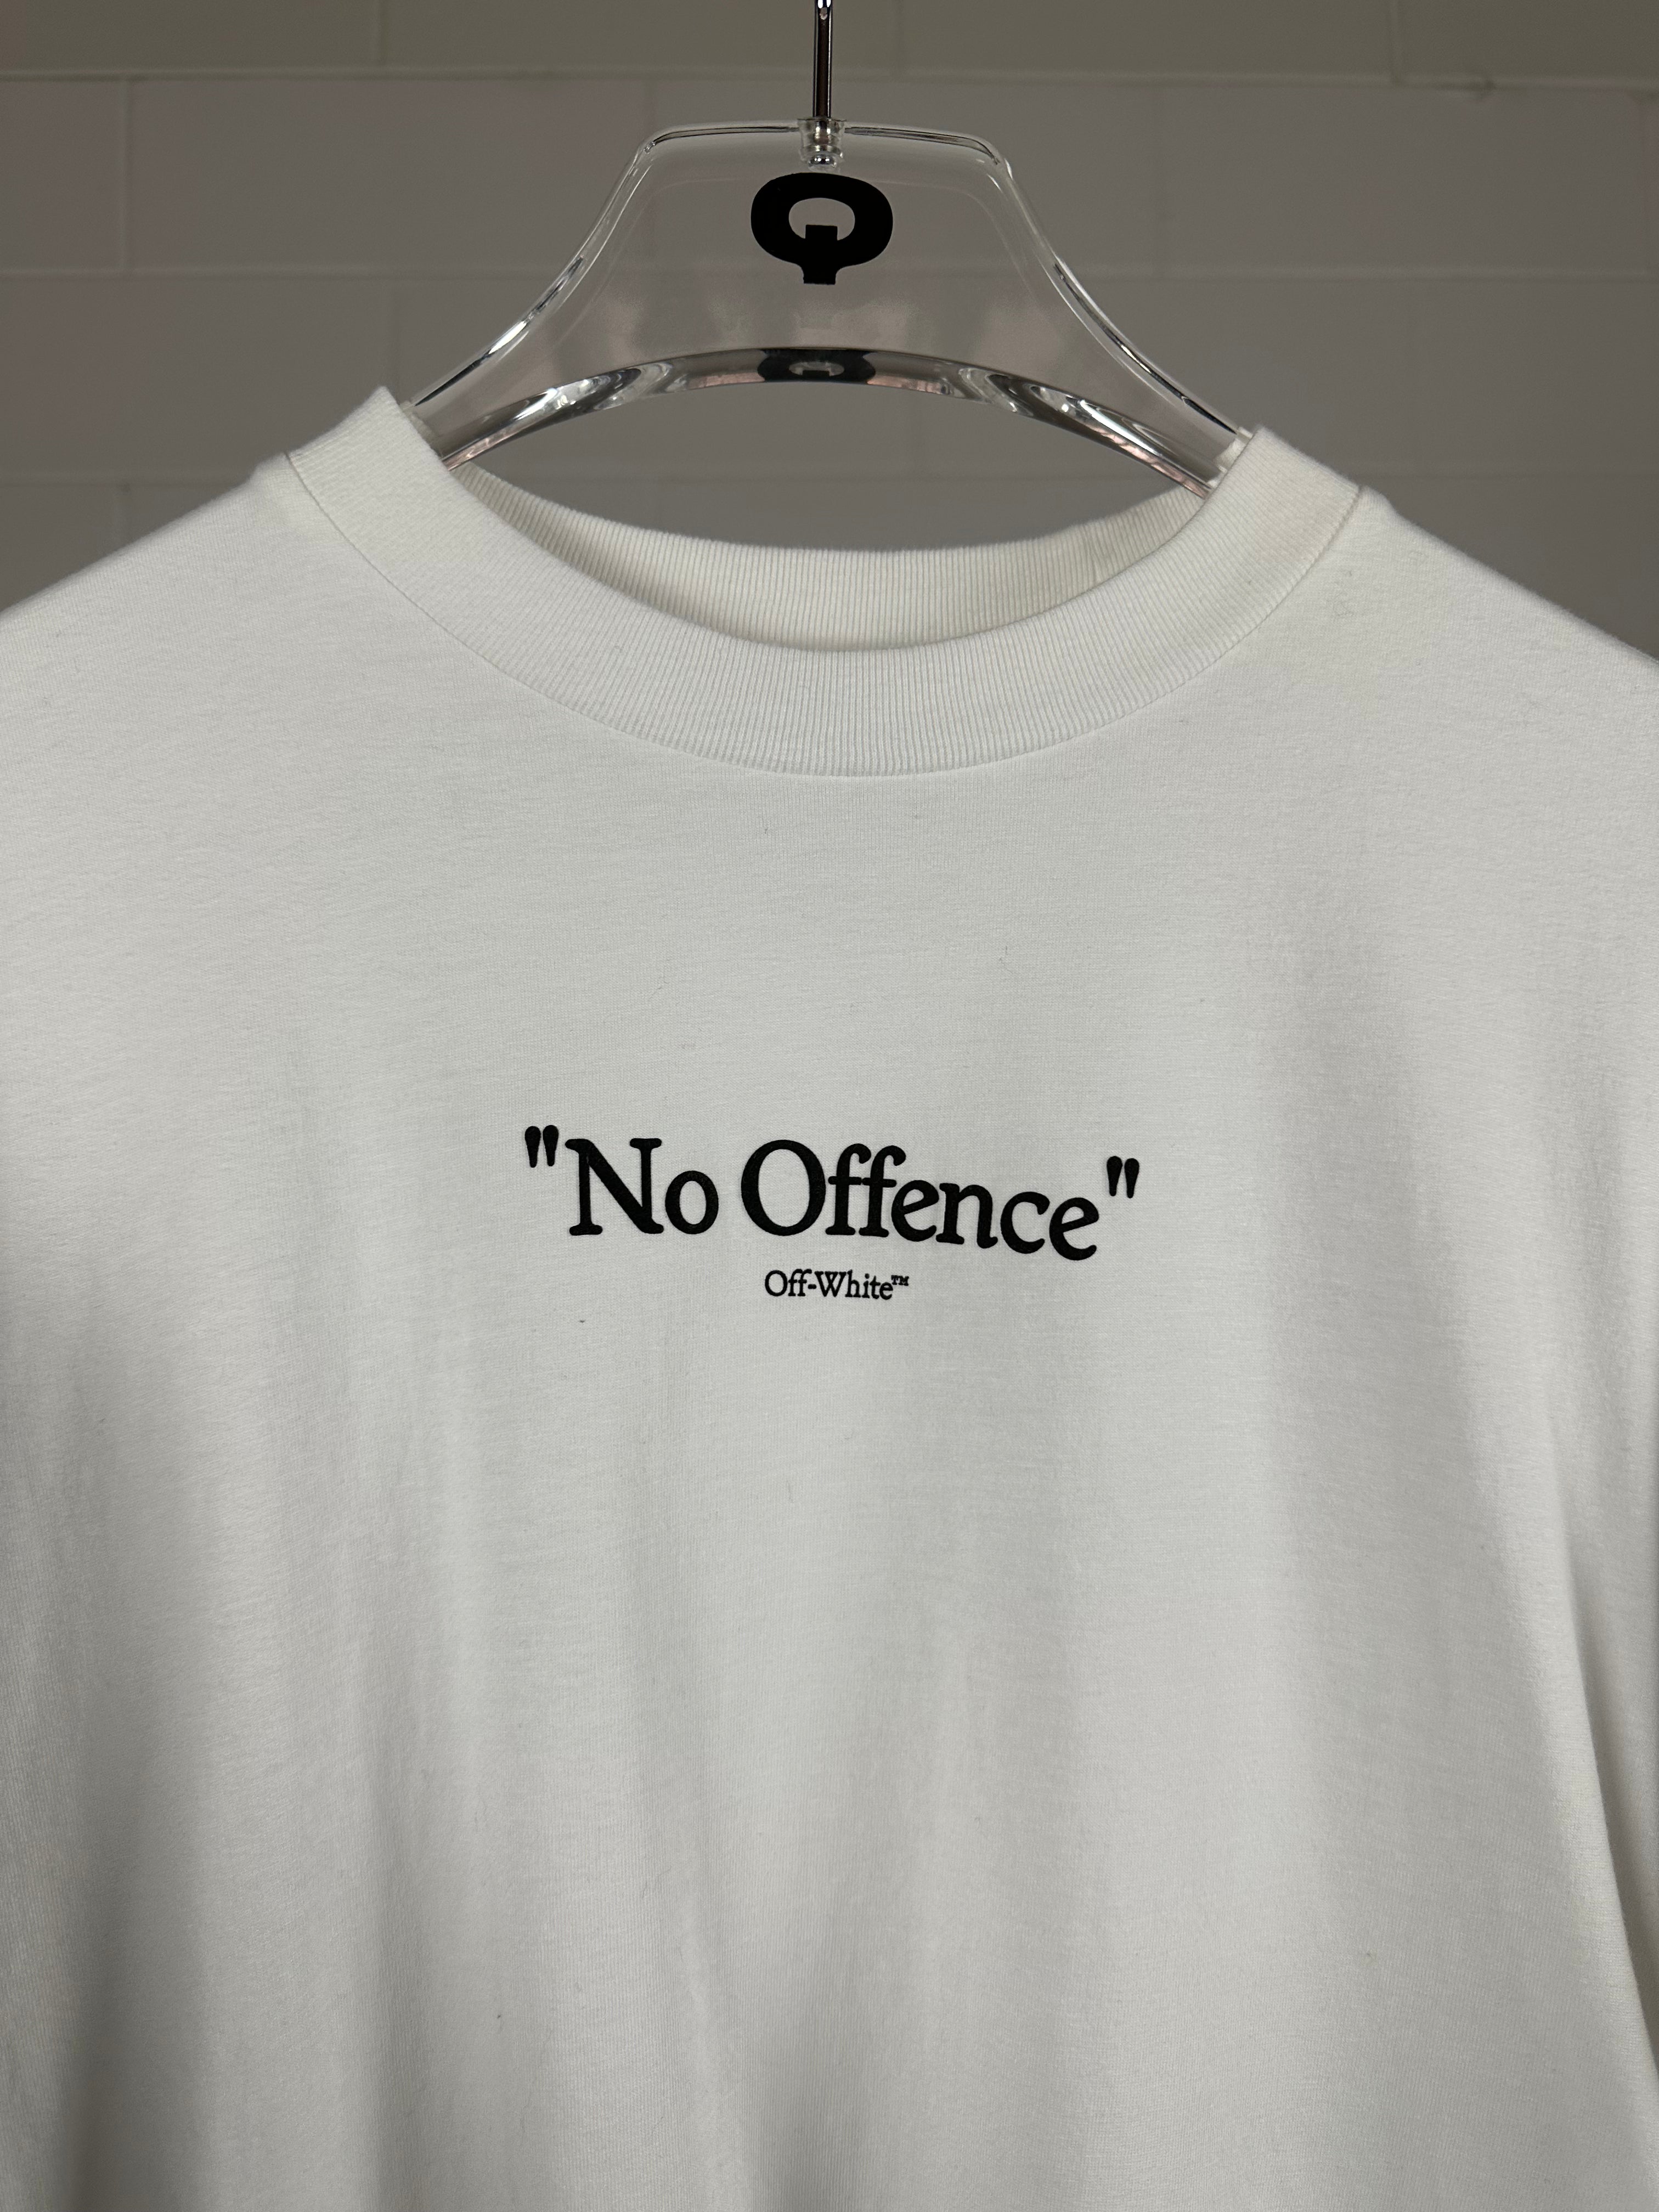 "No Offence" T-Shirt - QLHYPE